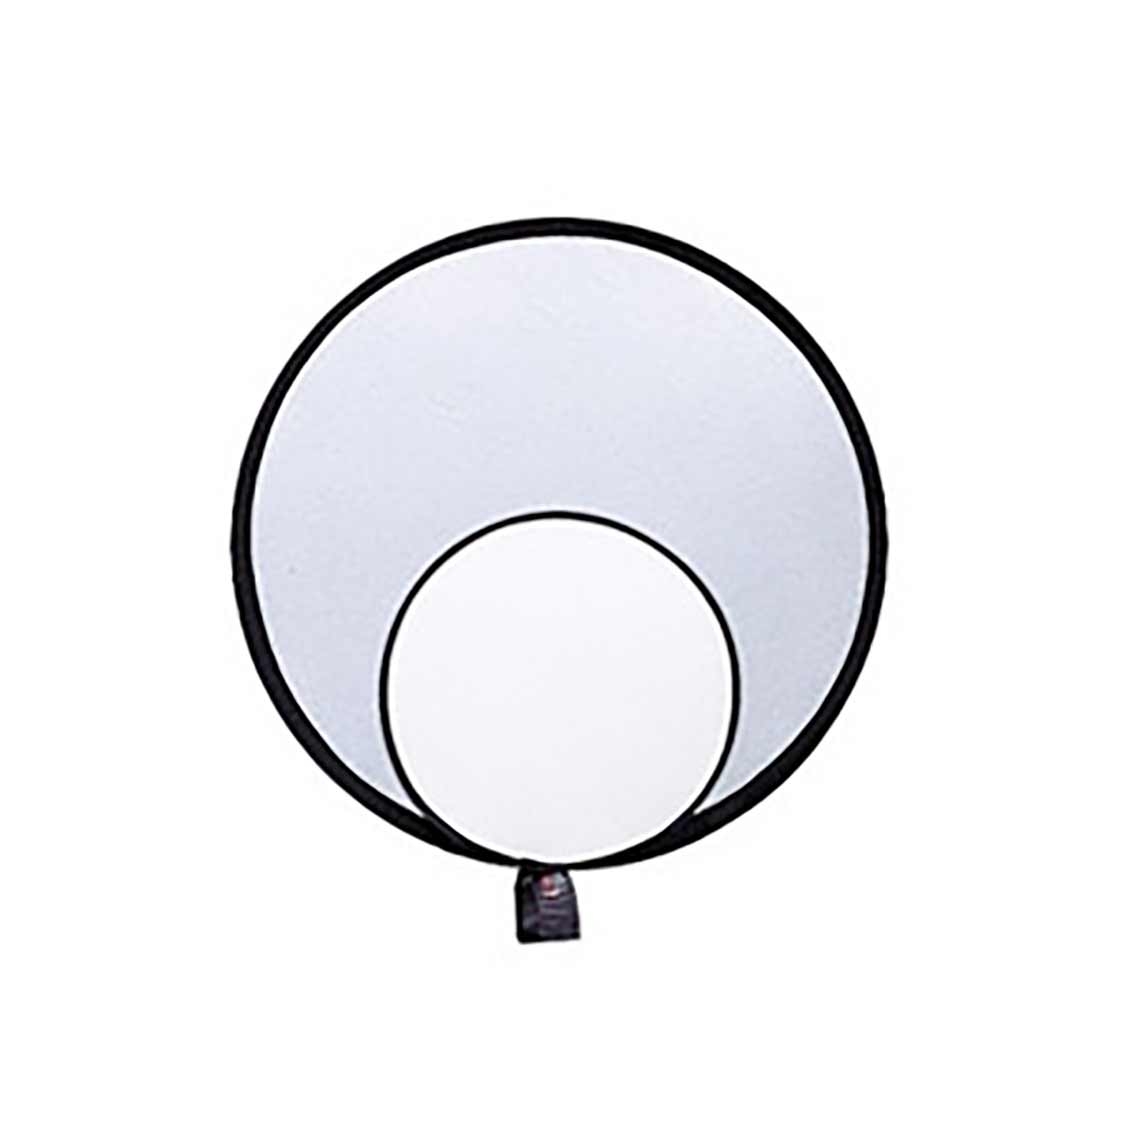 Promaster Reflectadisc 32-inch Silver/White